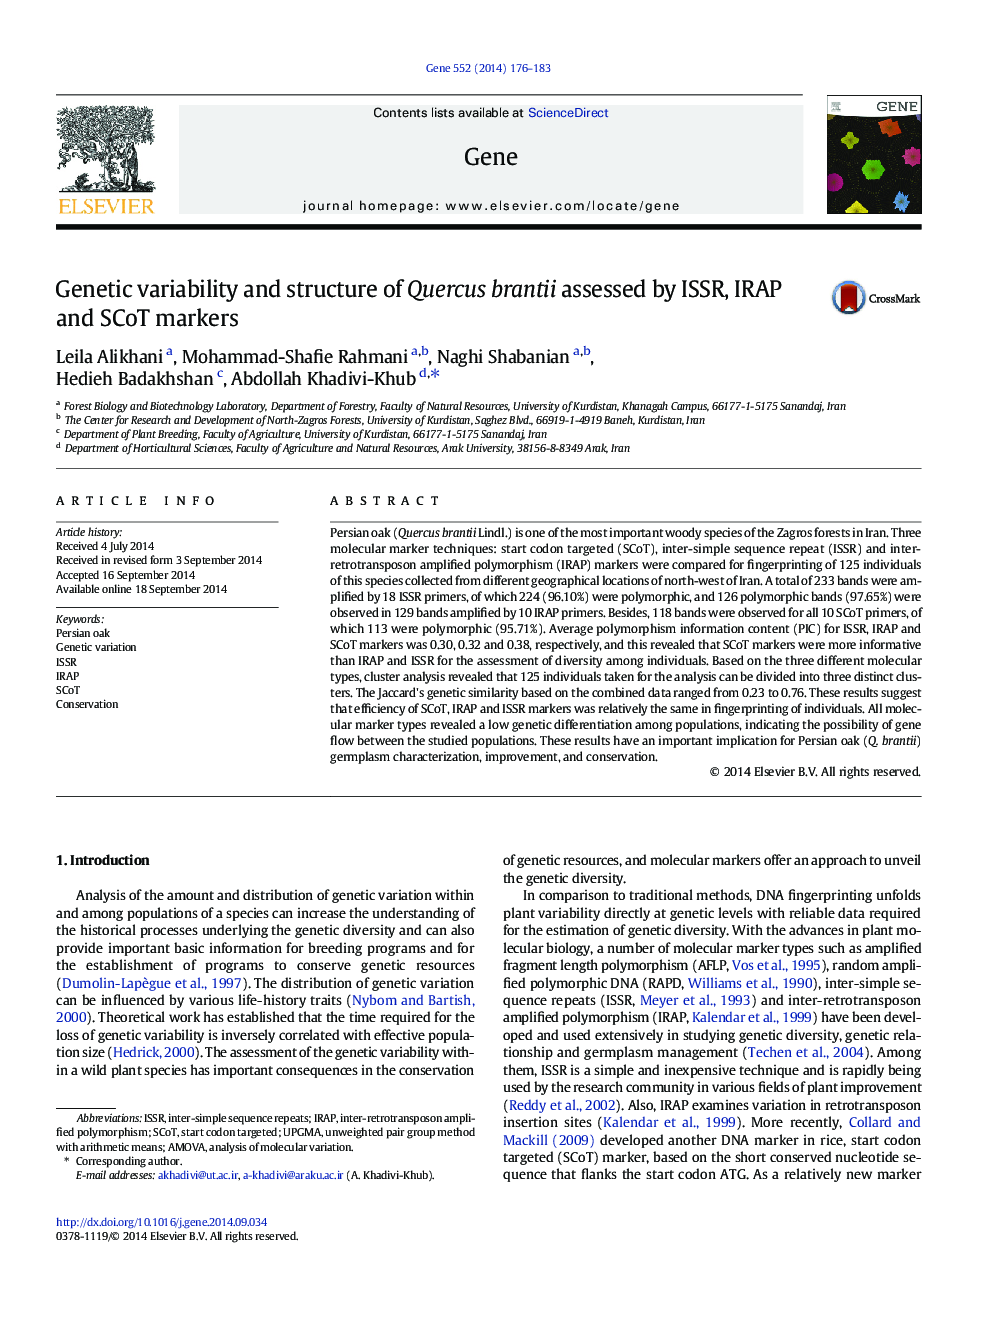 Genetic variability and structure of Quercus brantii assessed by ISSR, IRAP and SCoT markers